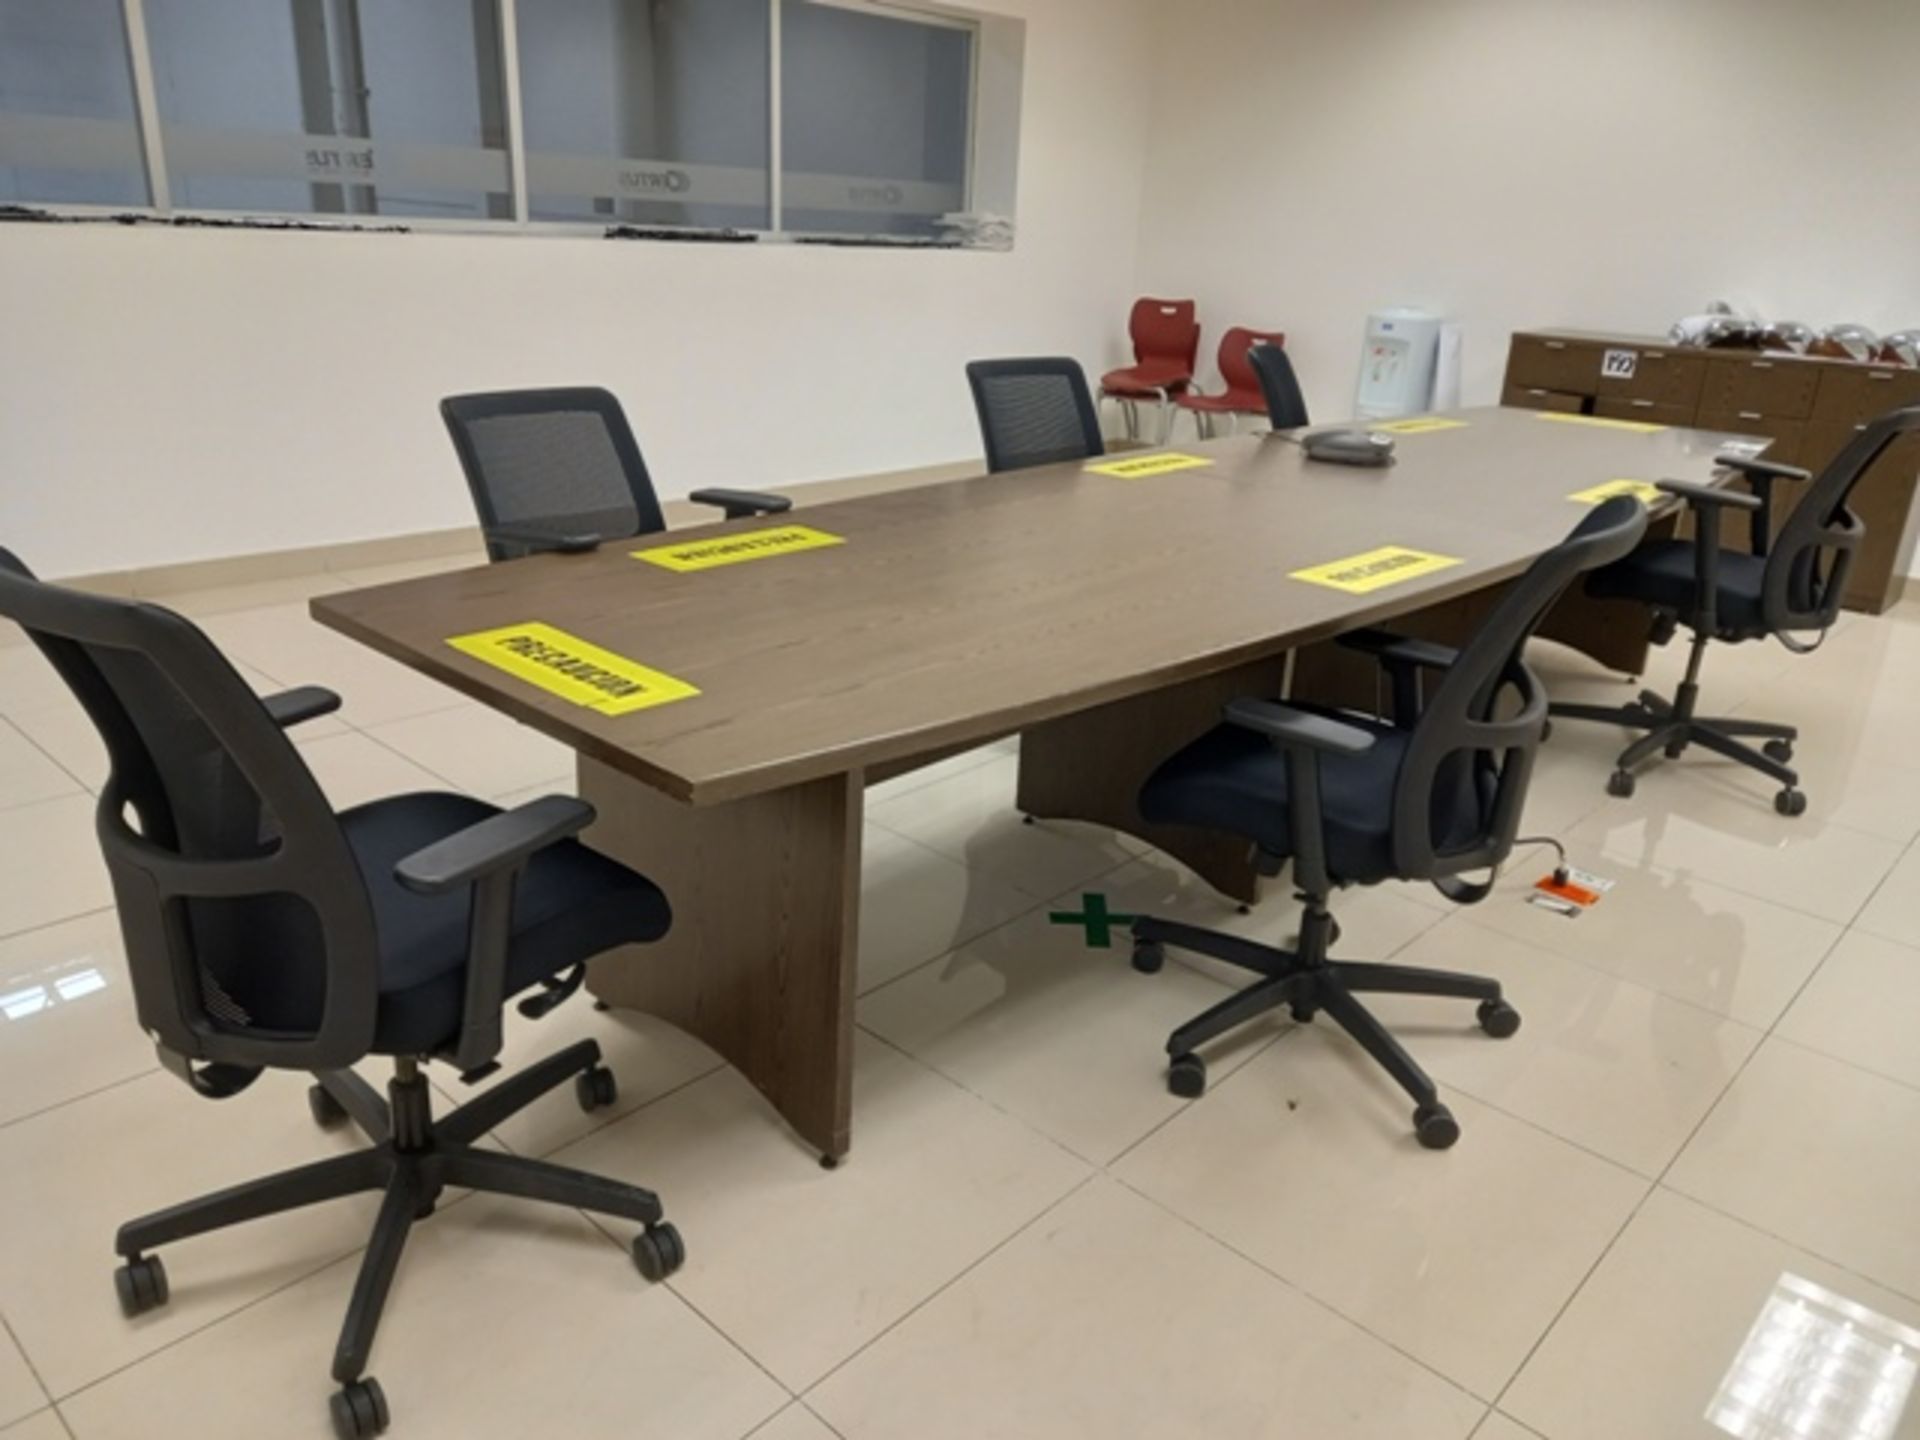 (16) Pcs Office Furniture Consisting Of: (1) 12 People Meeting Room Table, (6) Swivel, and more - Image 5 of 18